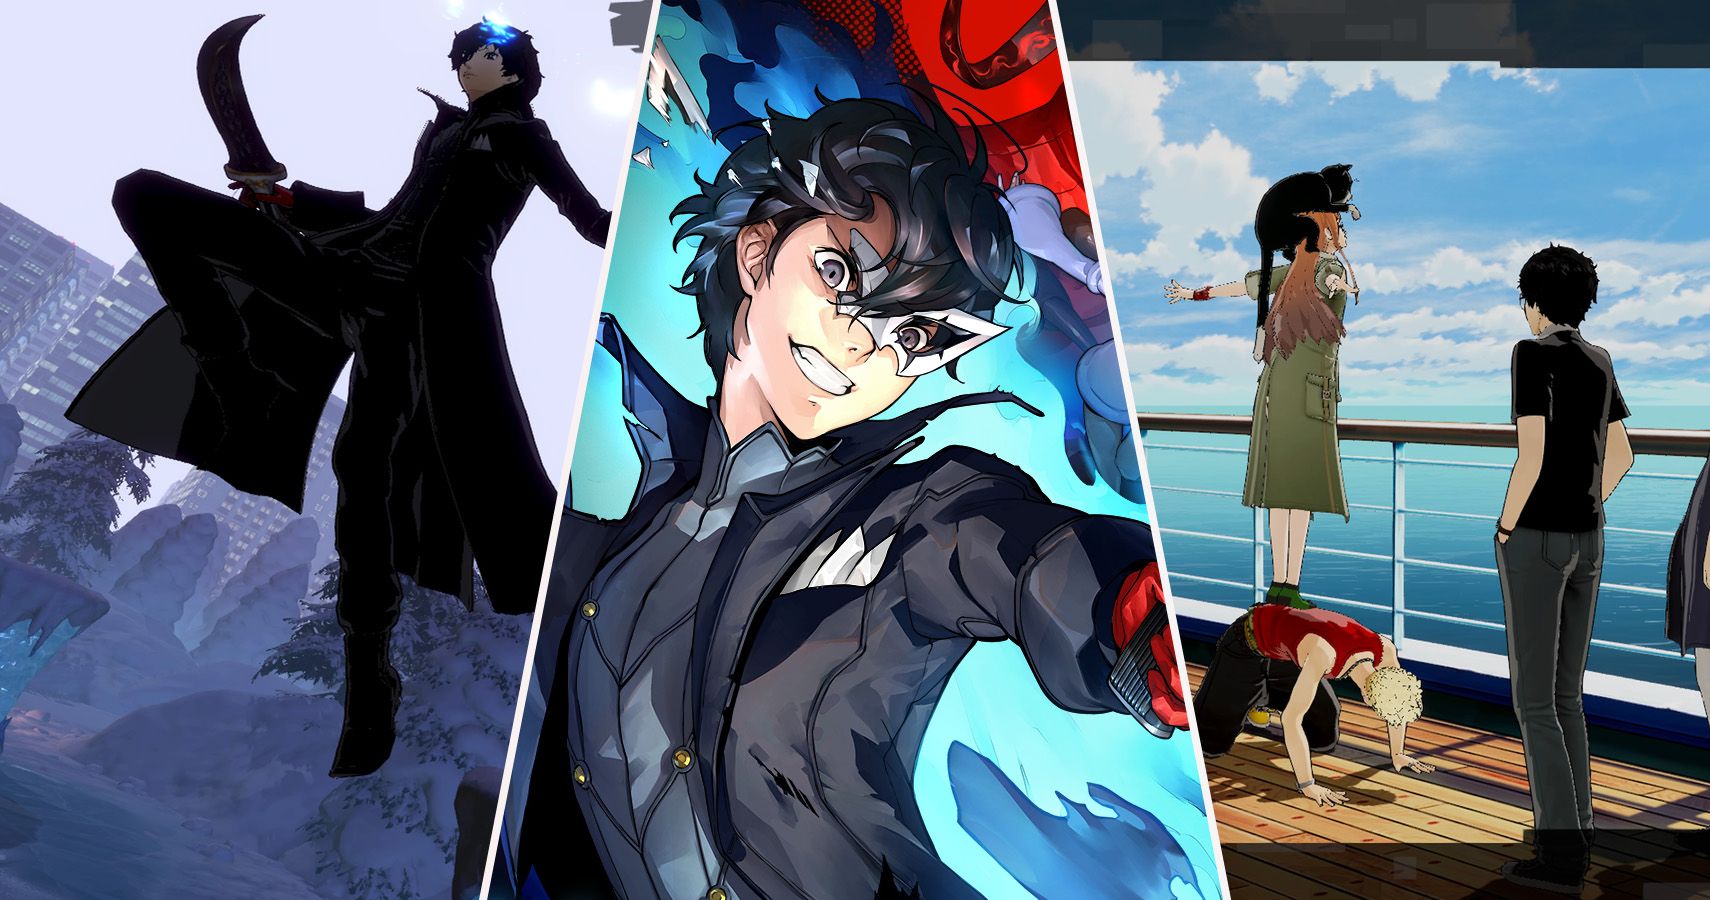 Persona 5 Strikers collage